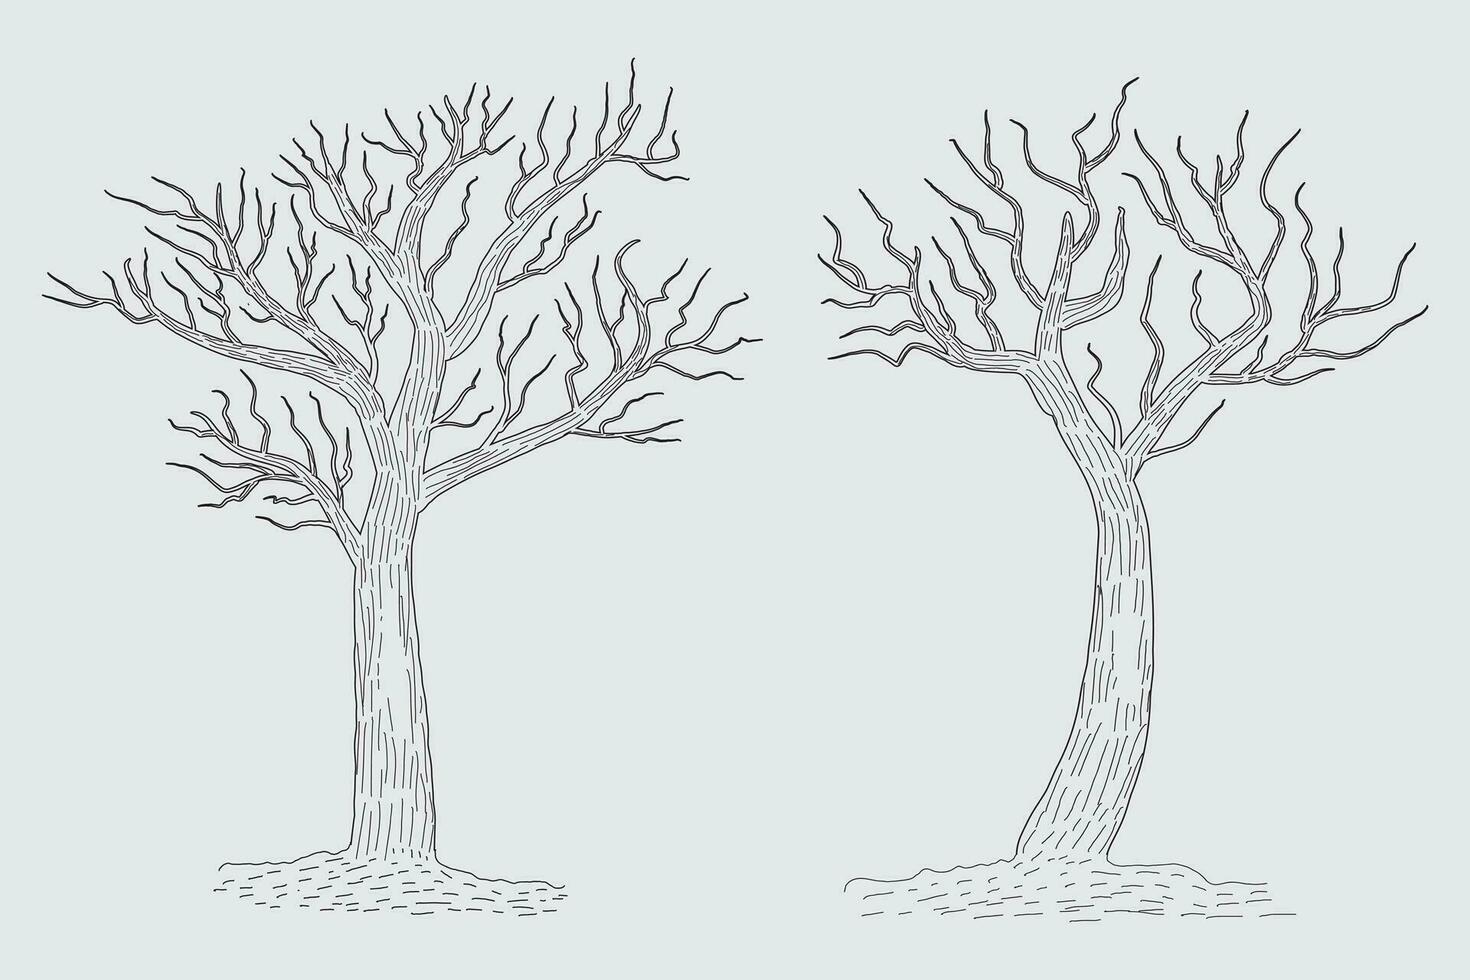 Hand drawn winter Bare Tree Sketch vector, bare Trees Leafless dead old dry No leaves pencil sketch illustration, Winter Naked Branch without leave Dead tree drawing Coloring Page nature forest icon vector